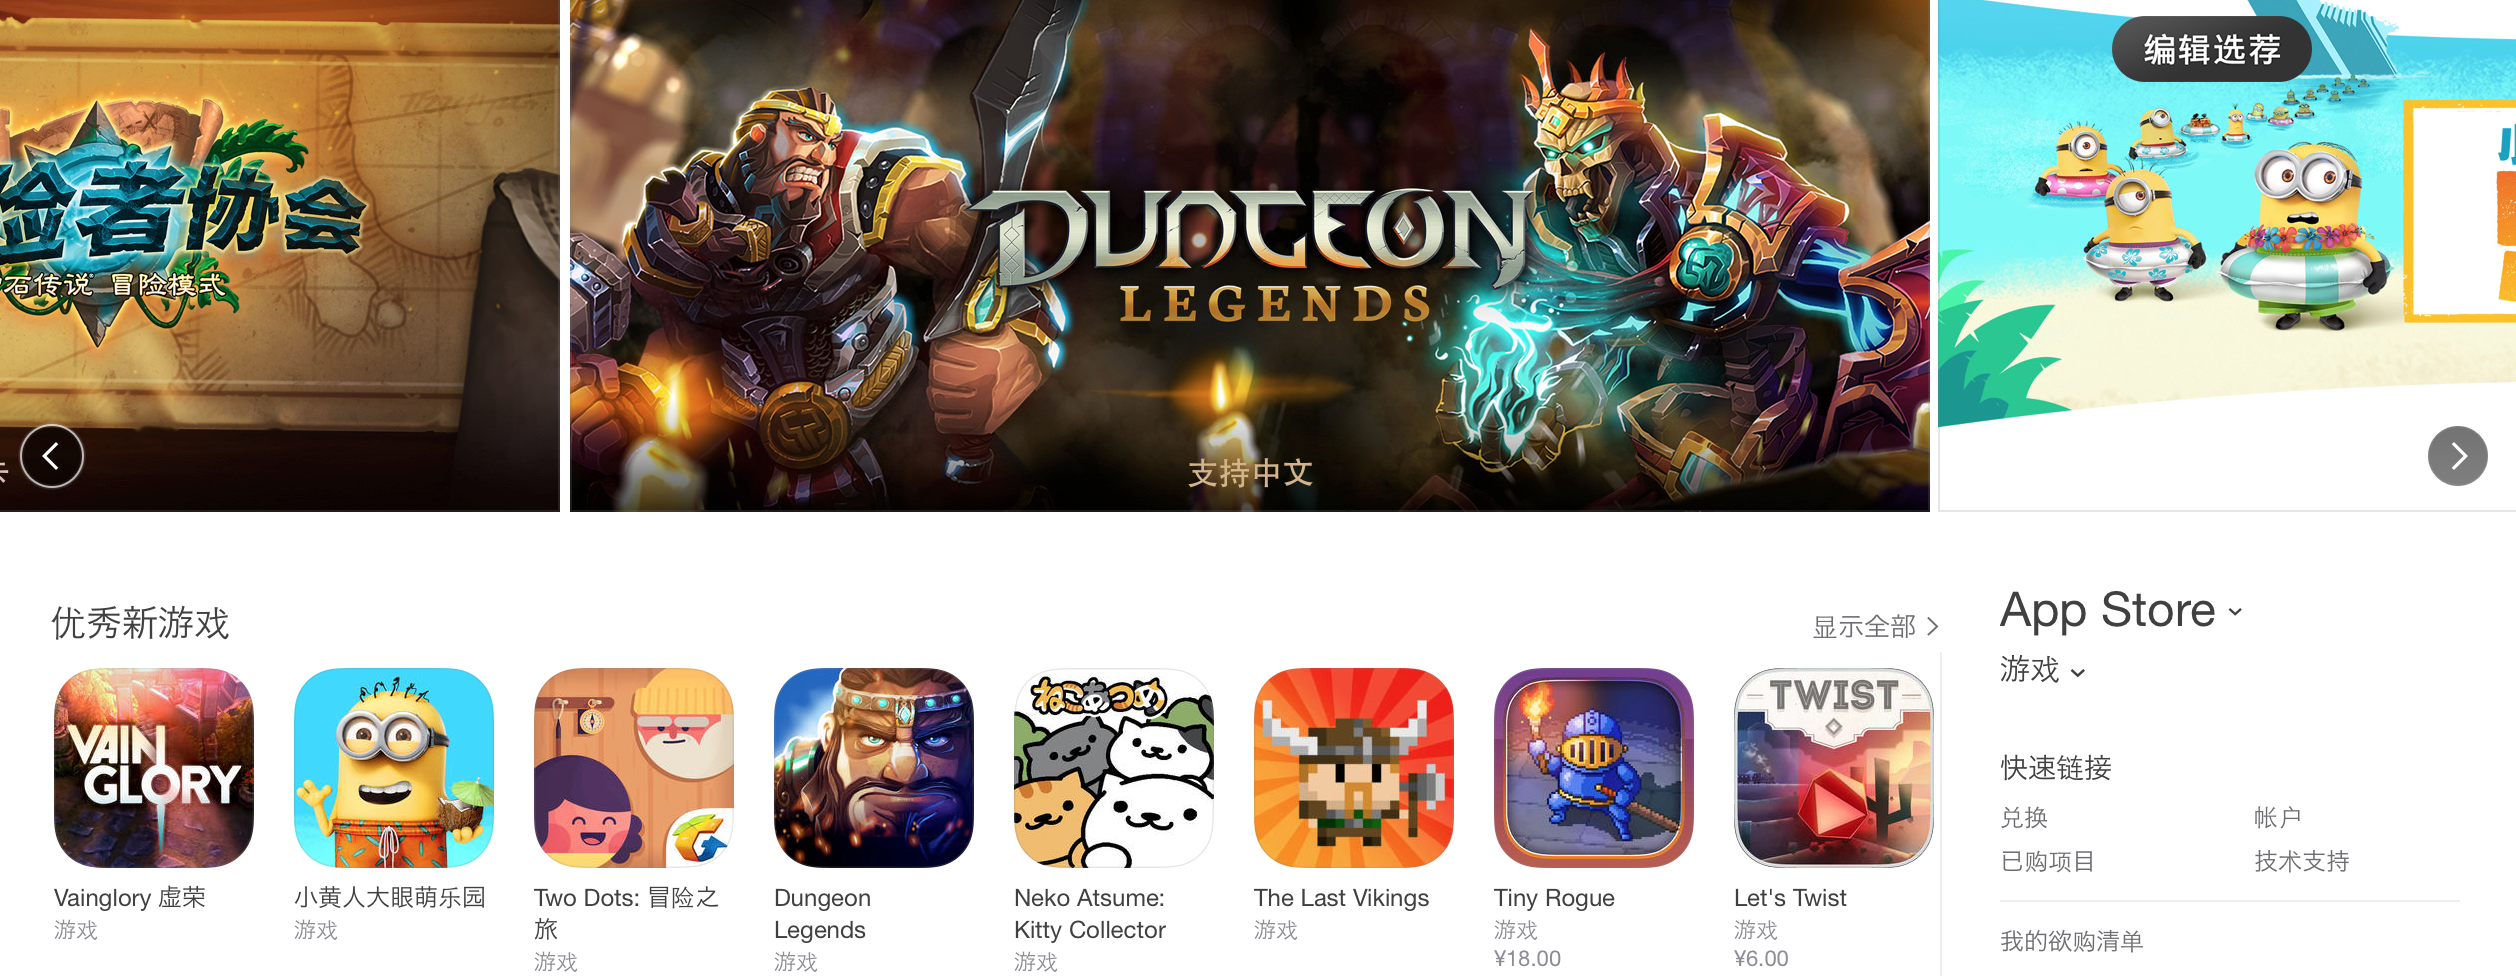 Dungeon Legends Features iTunes China